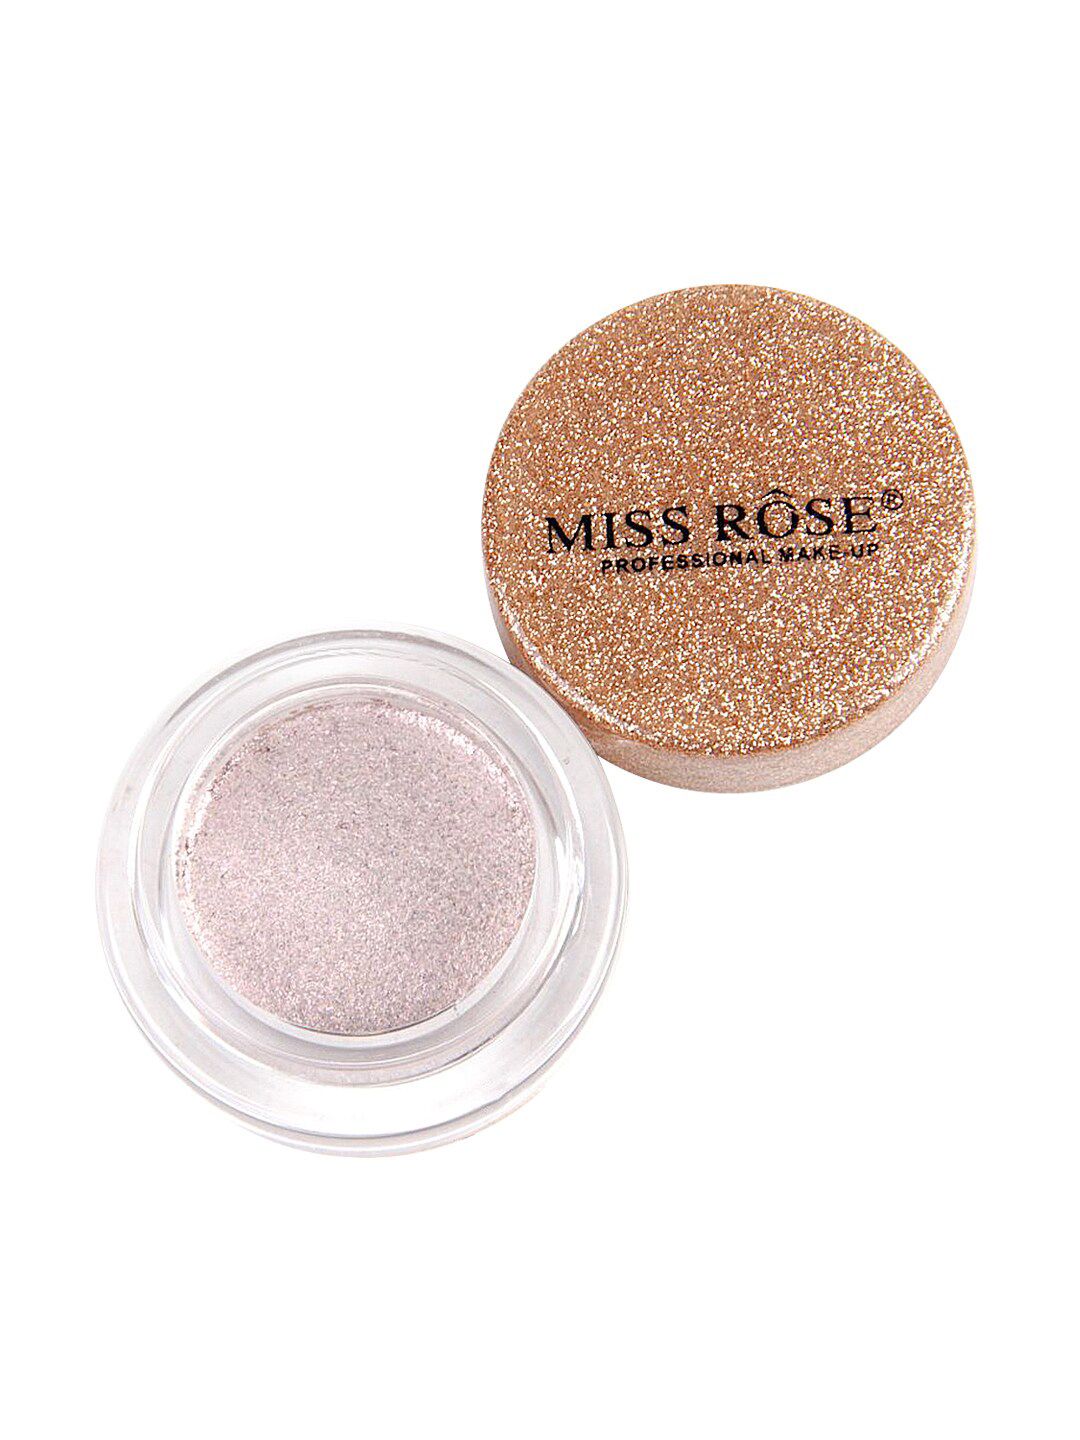 MISS ROSE Single Glitter Eyeshadow 20 g - SHE SPARKLES 7001-005M 03 Price in India